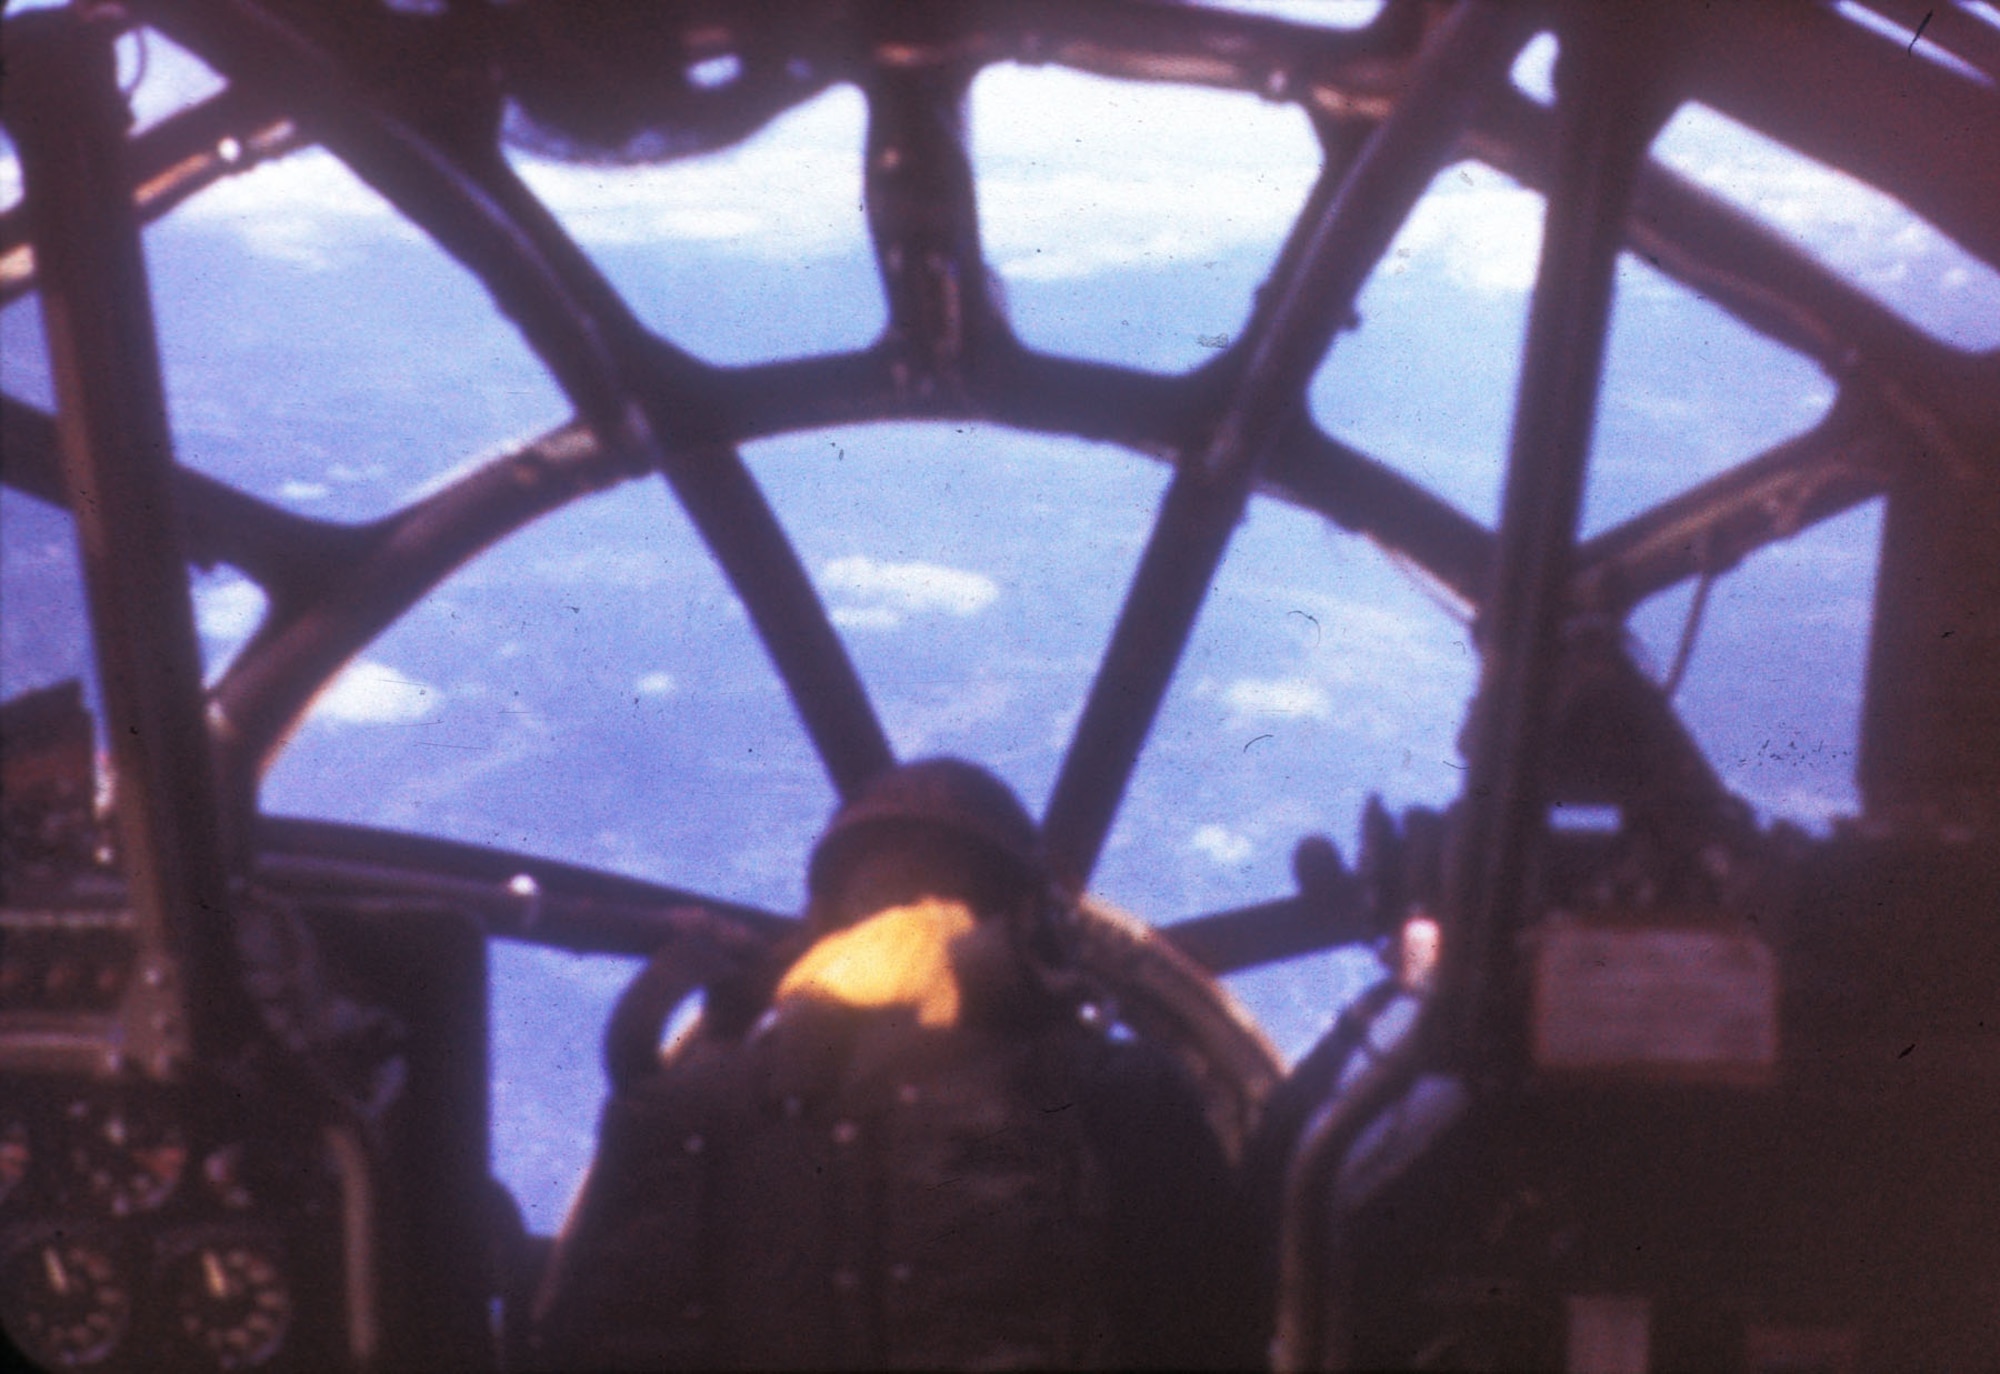 B-29 bombardier hunched over the bombsight in the nose. (U.S. Air Force photo)